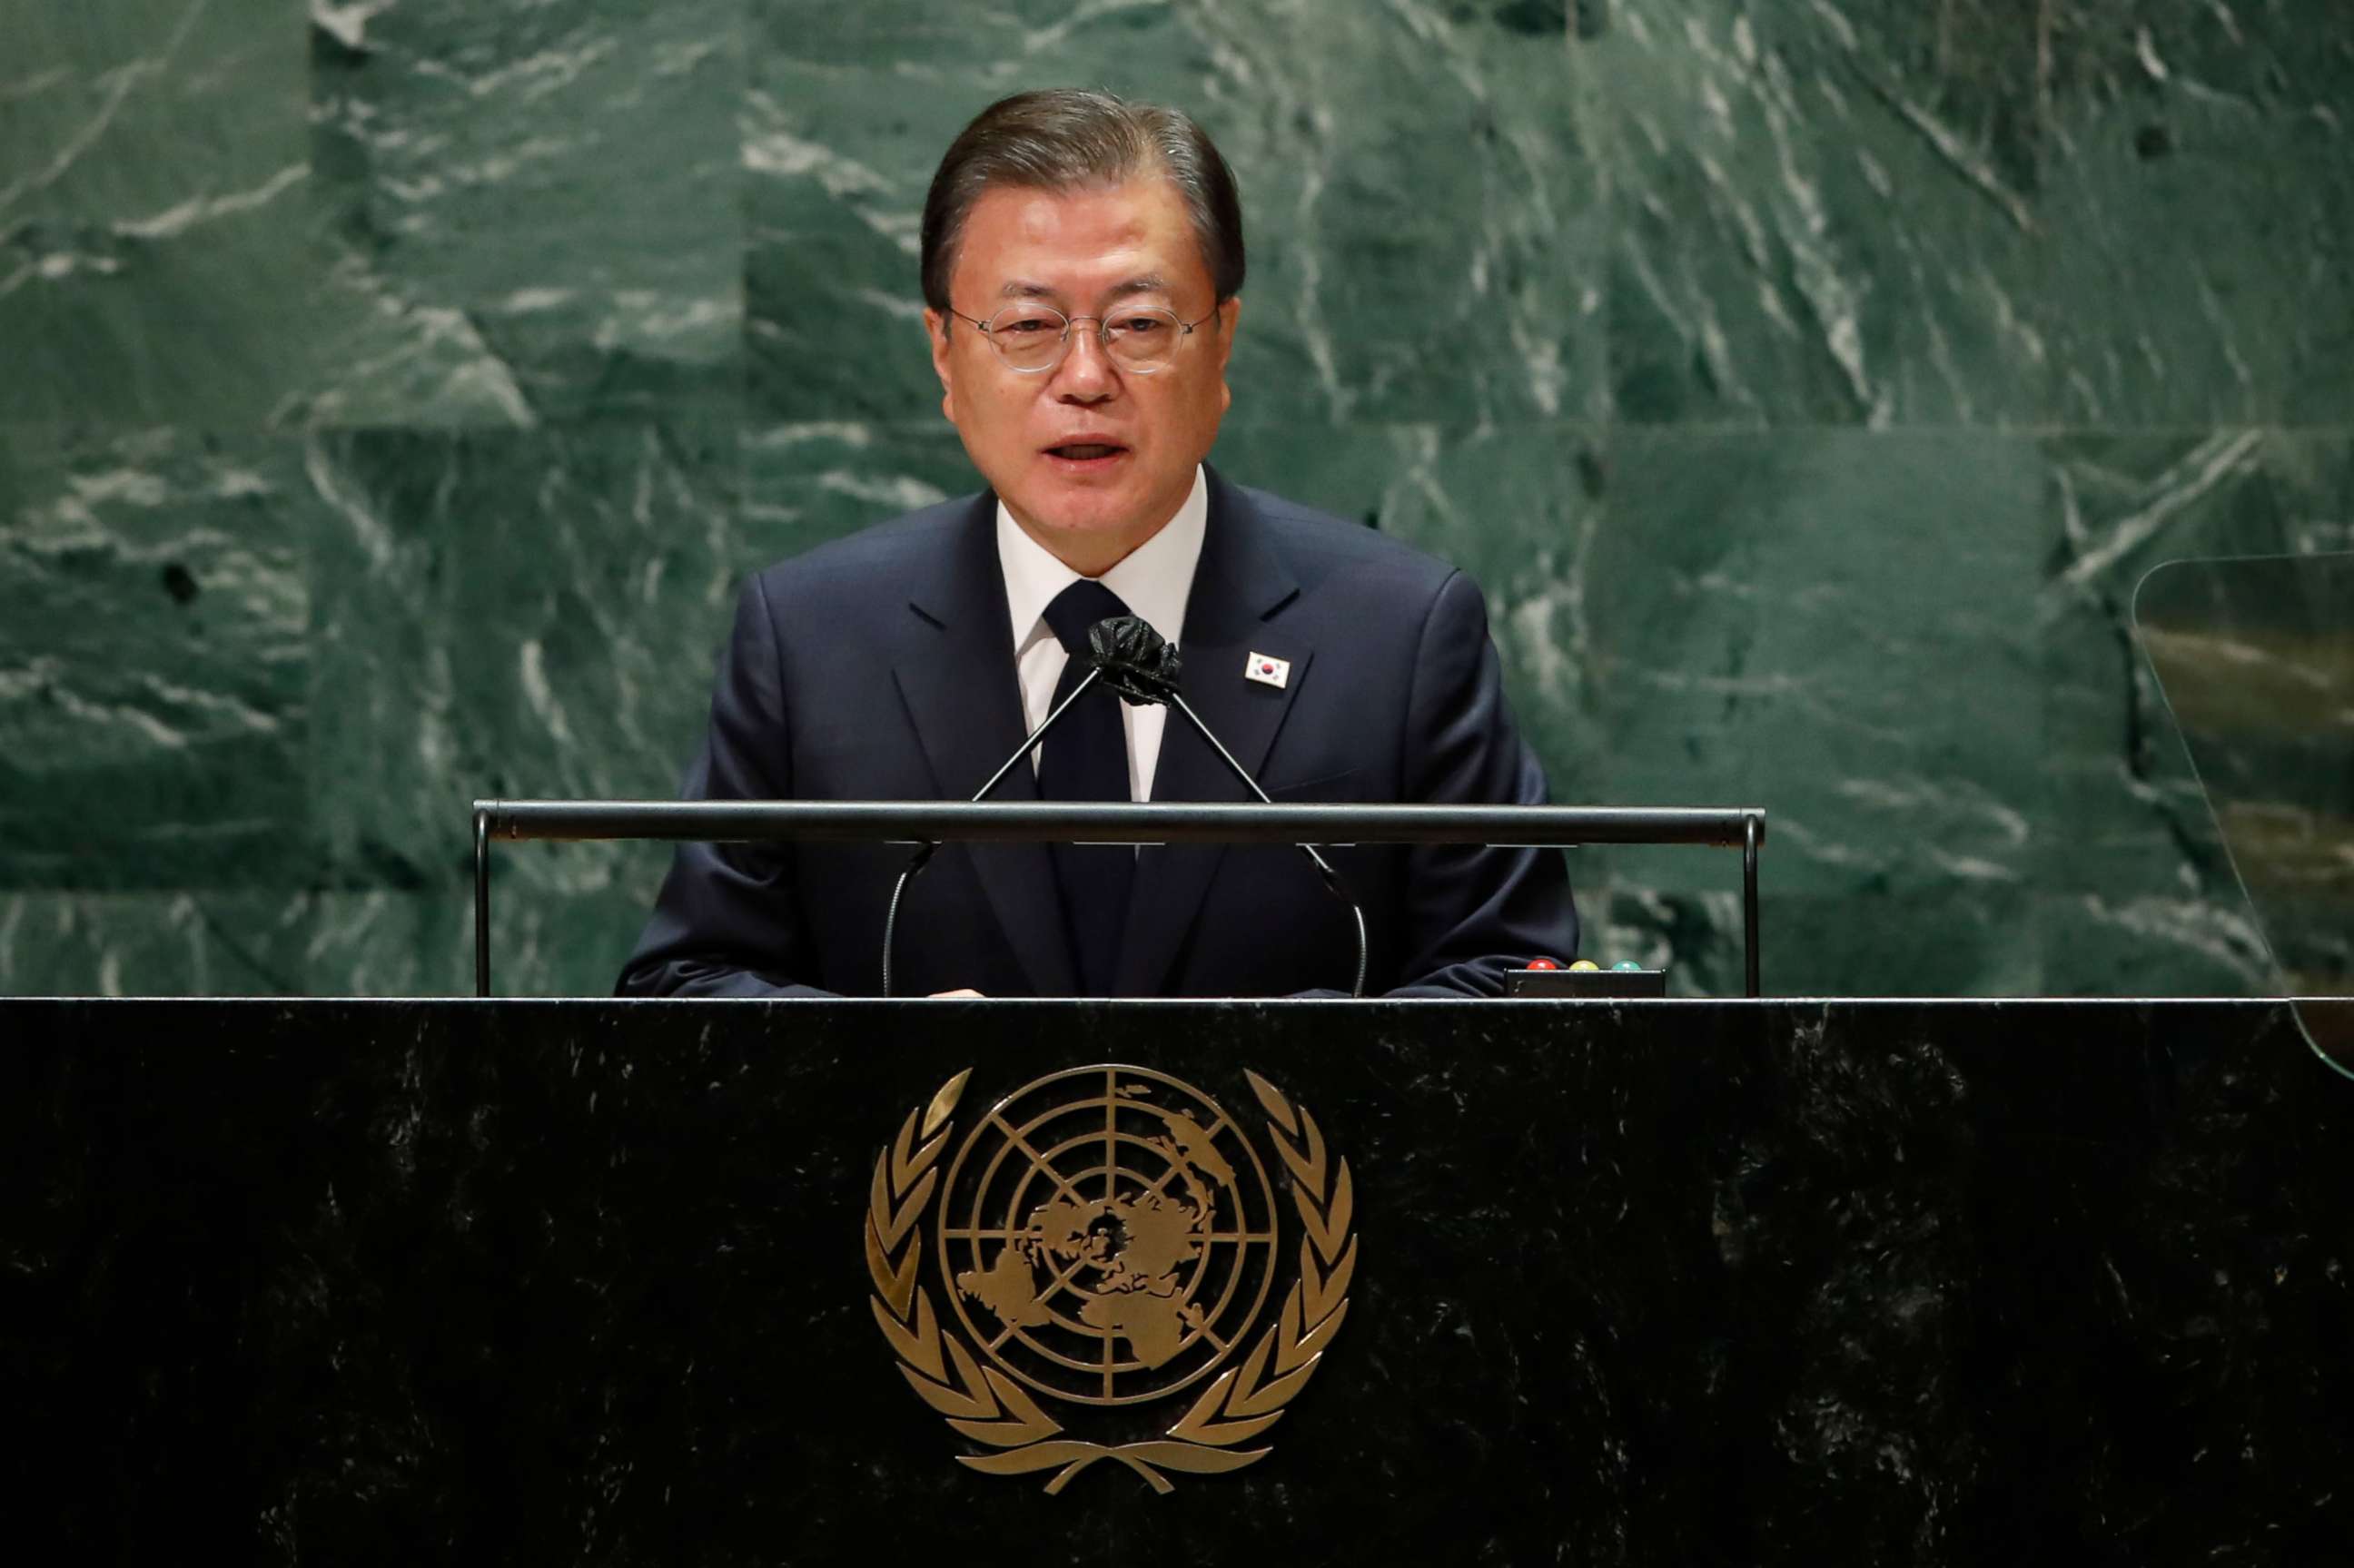 PHOTO: South Korea's President Moon Jae-in addresses the 76th Session of the U.N. General Assembly on Sept. 21, 2021 at U.N. headquarters in New York City.